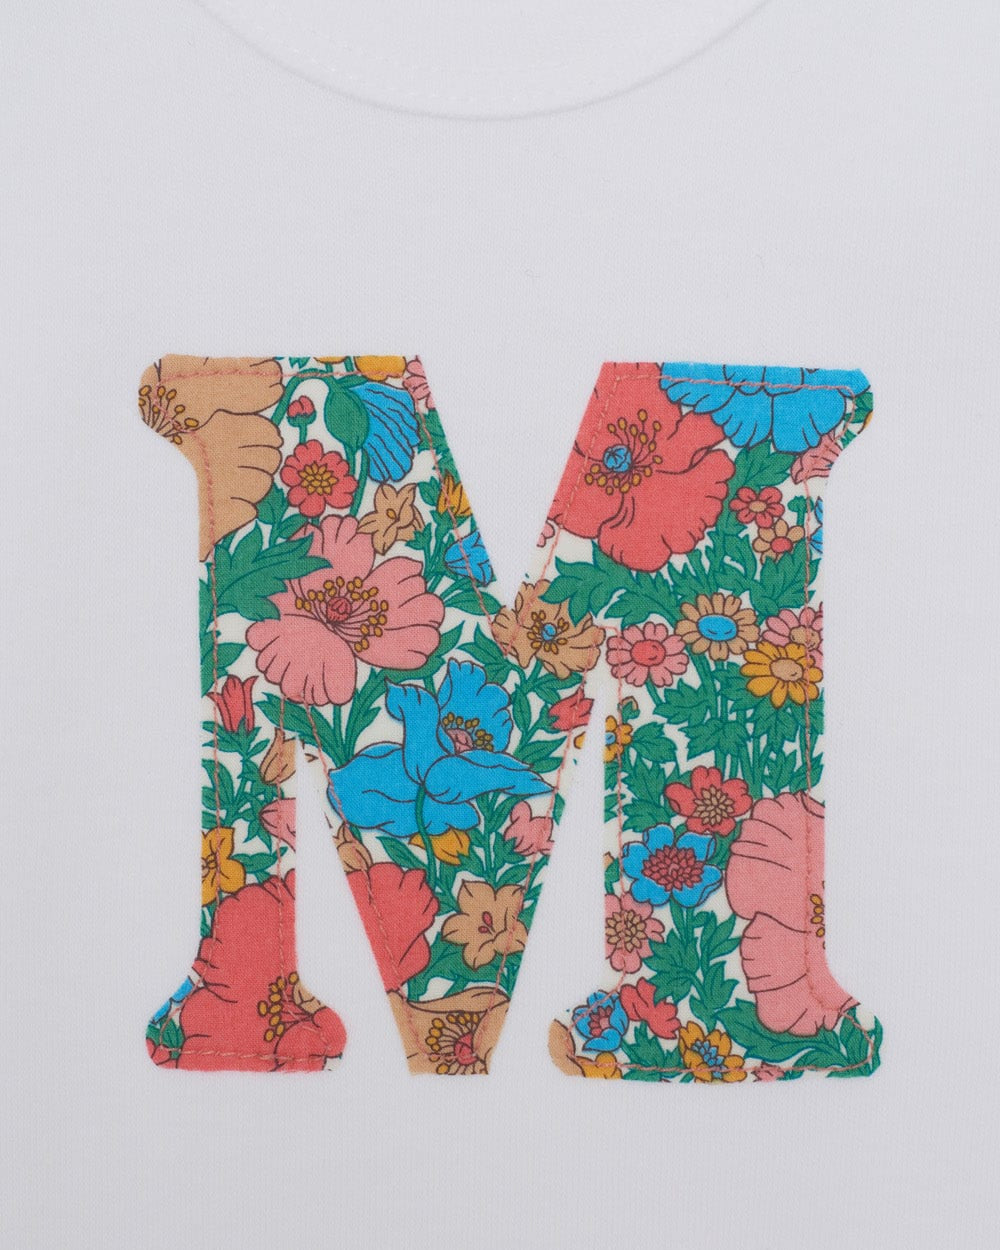 Magnificent Stanley Bodysuit Personalised Bodysuit in Meadow Song Liberty Print